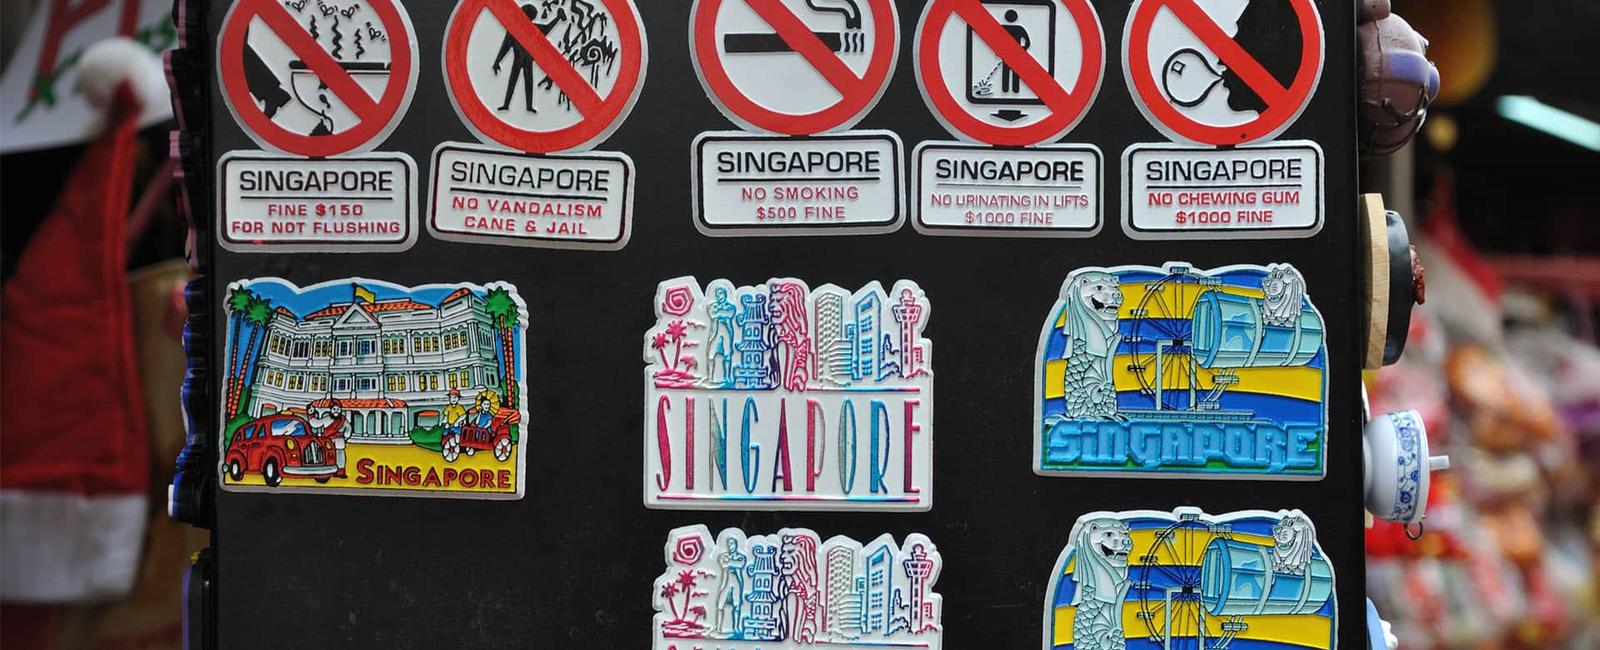 It is illegal to chew gum in singapore and importing selling or making gum can lead to jail time